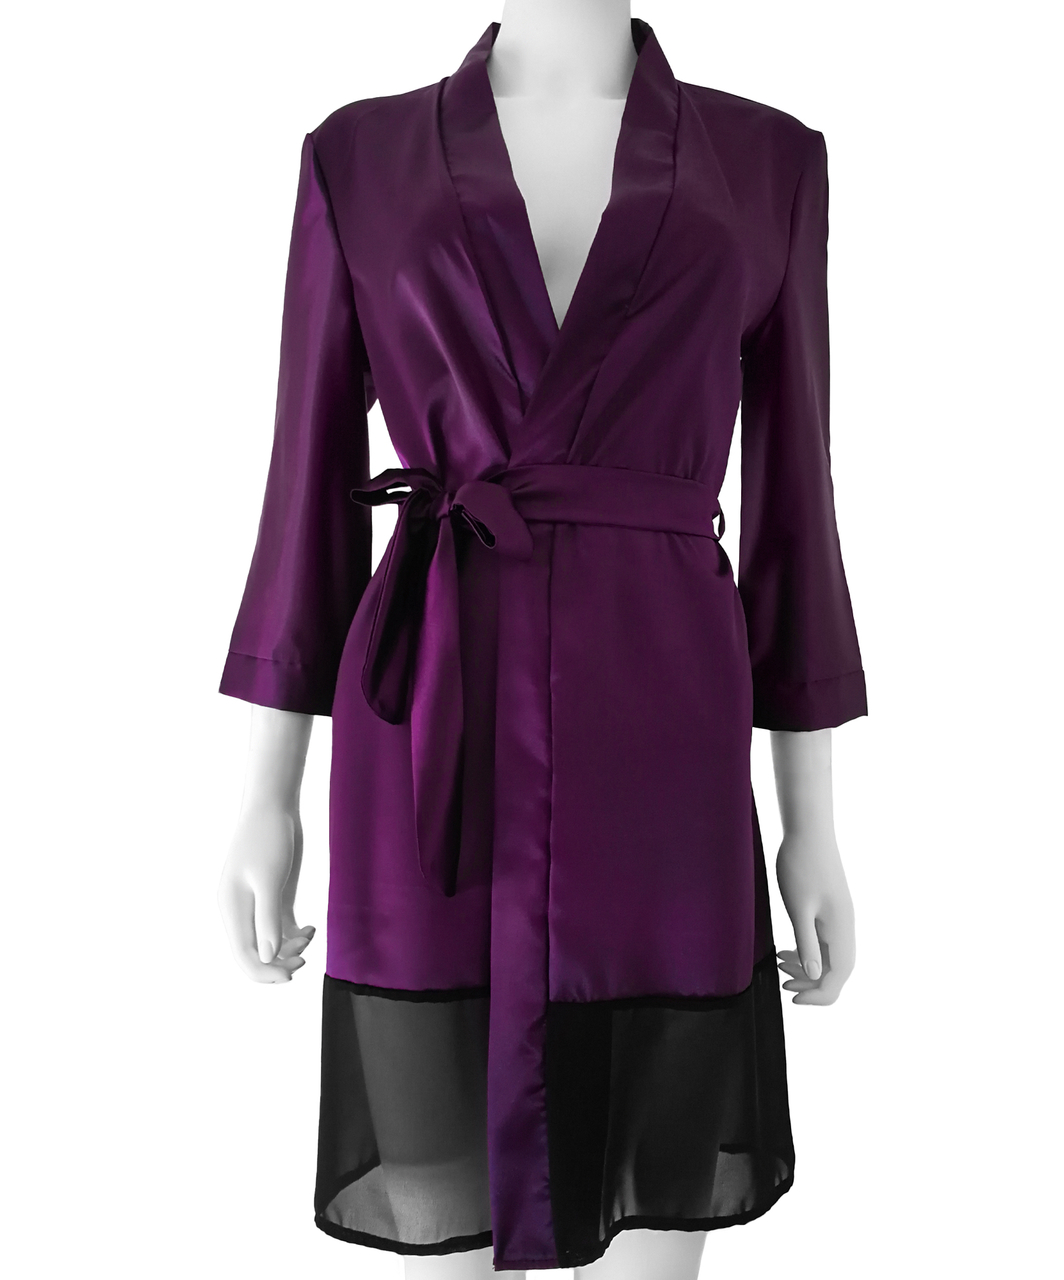 SexyStyle purple robe with black hemline